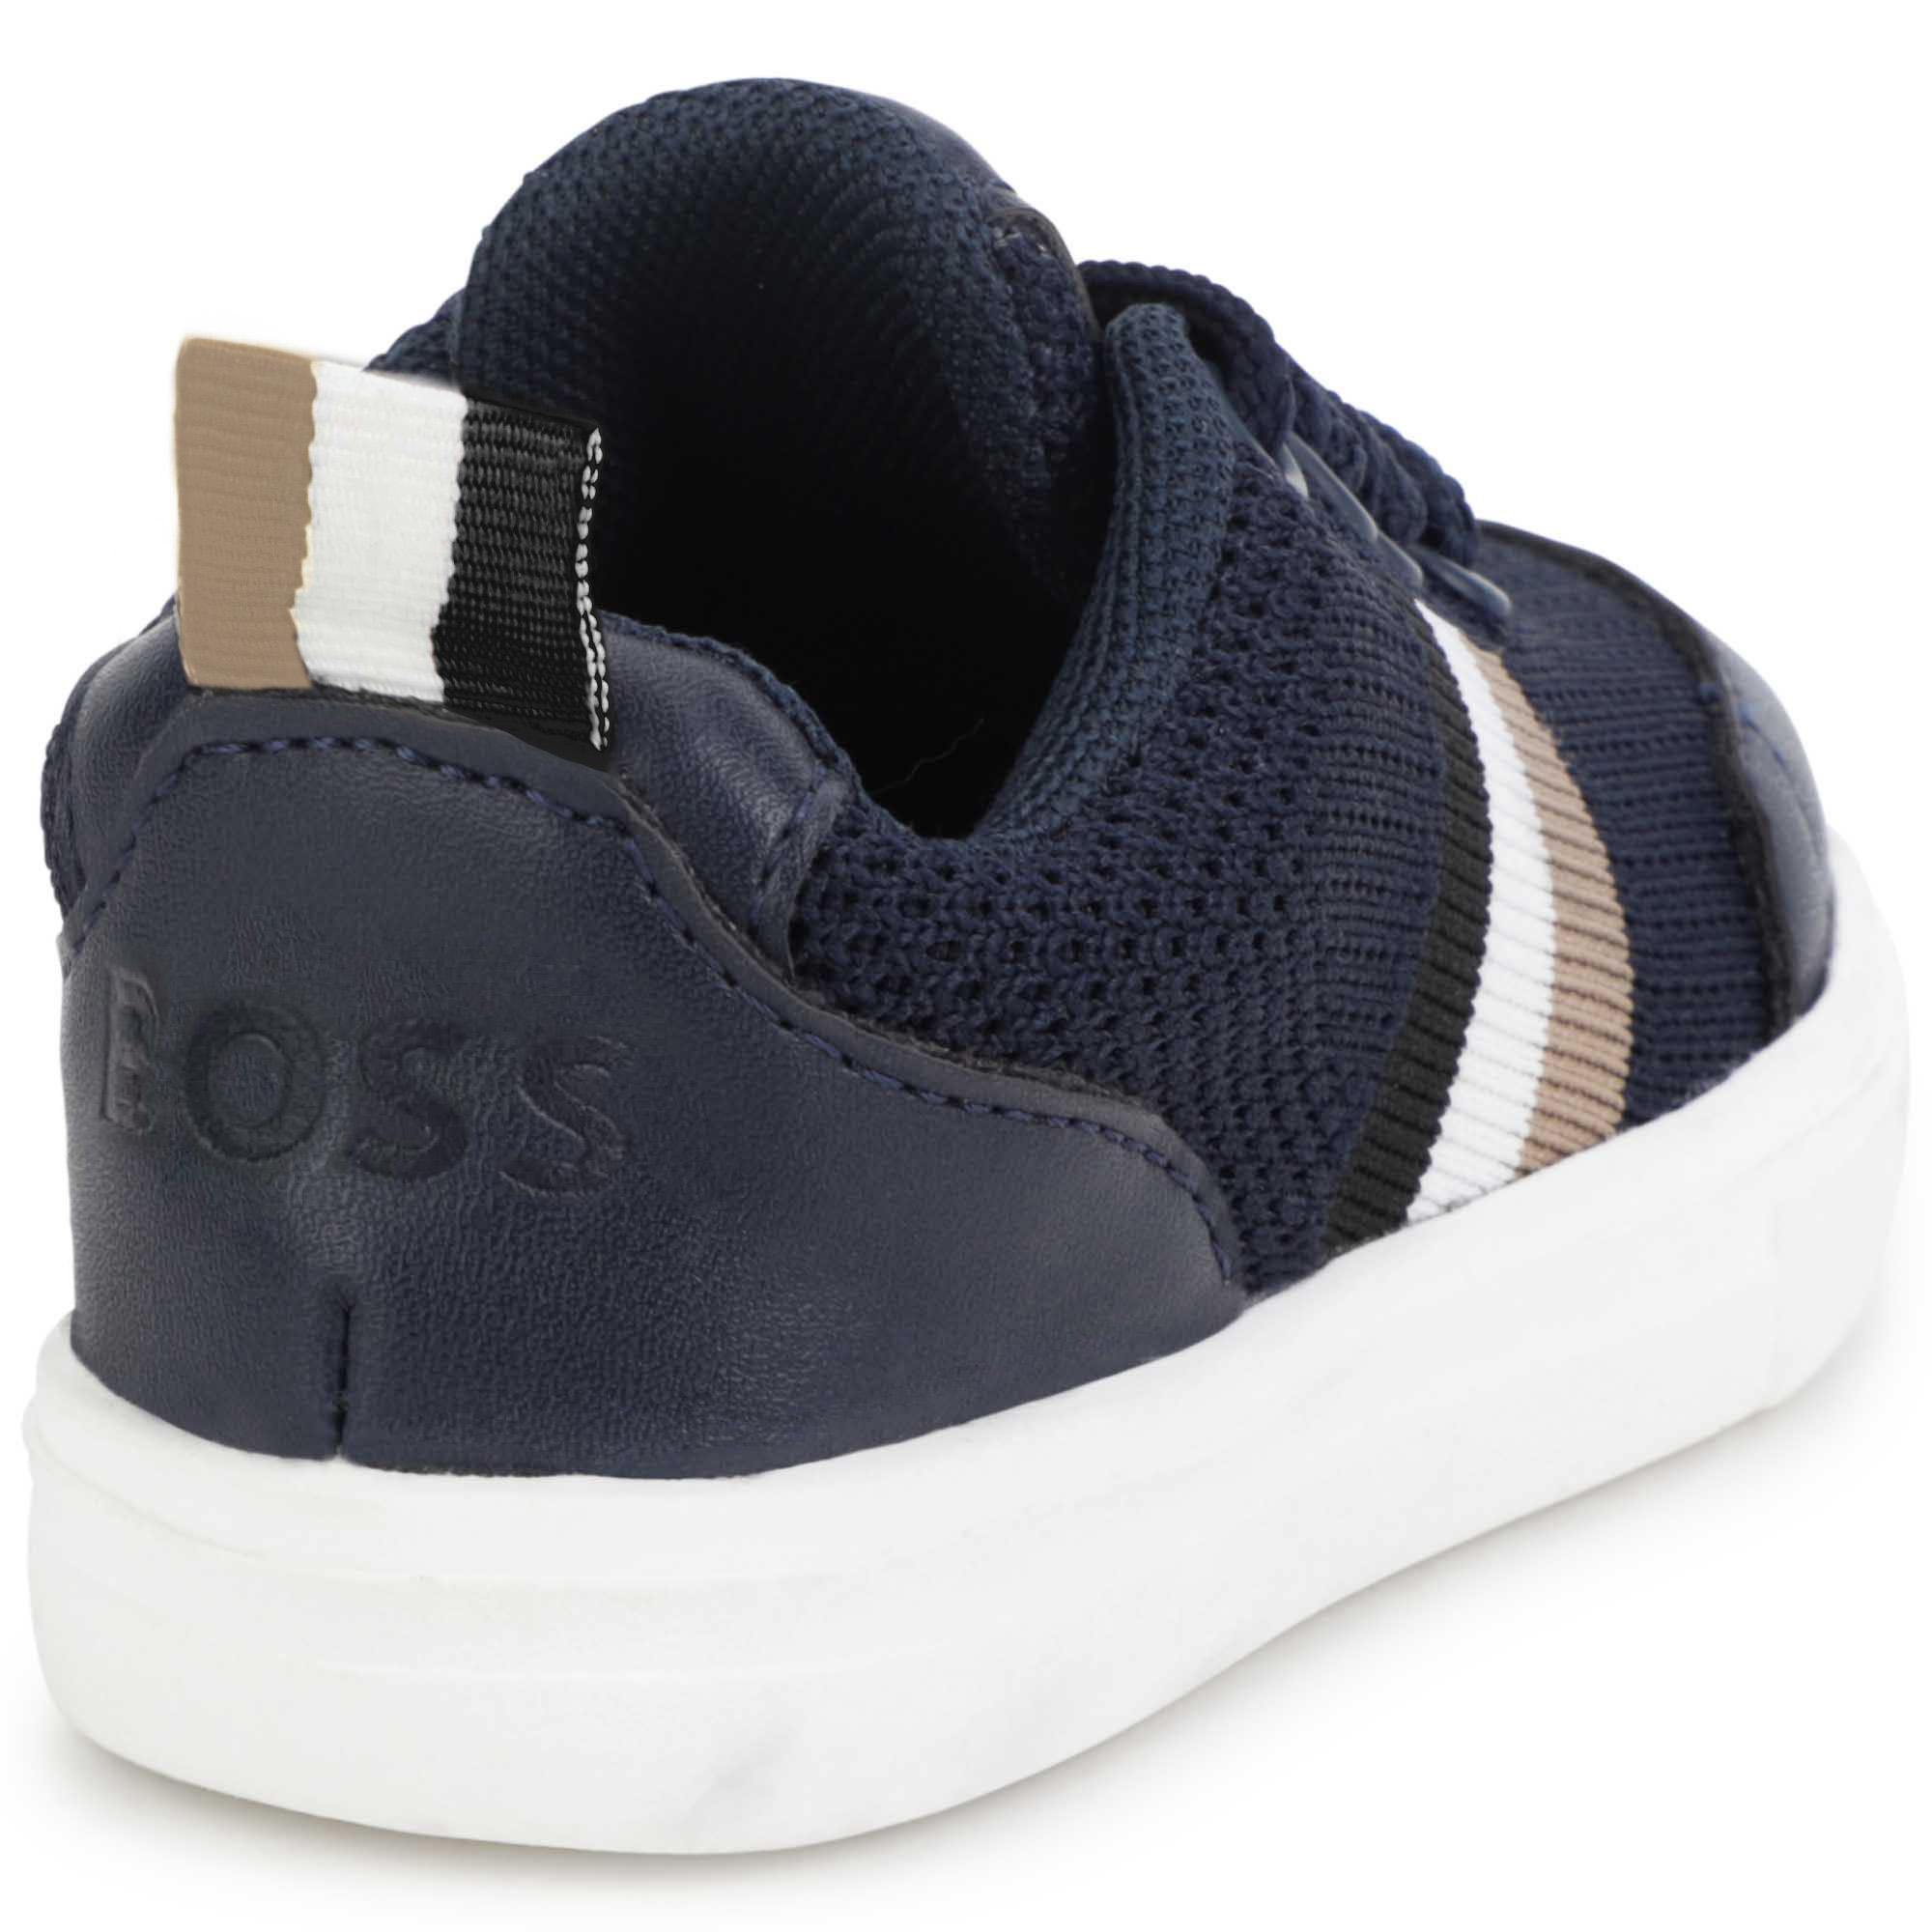 Dual-fabric lace-up trainers BOSS for BOY